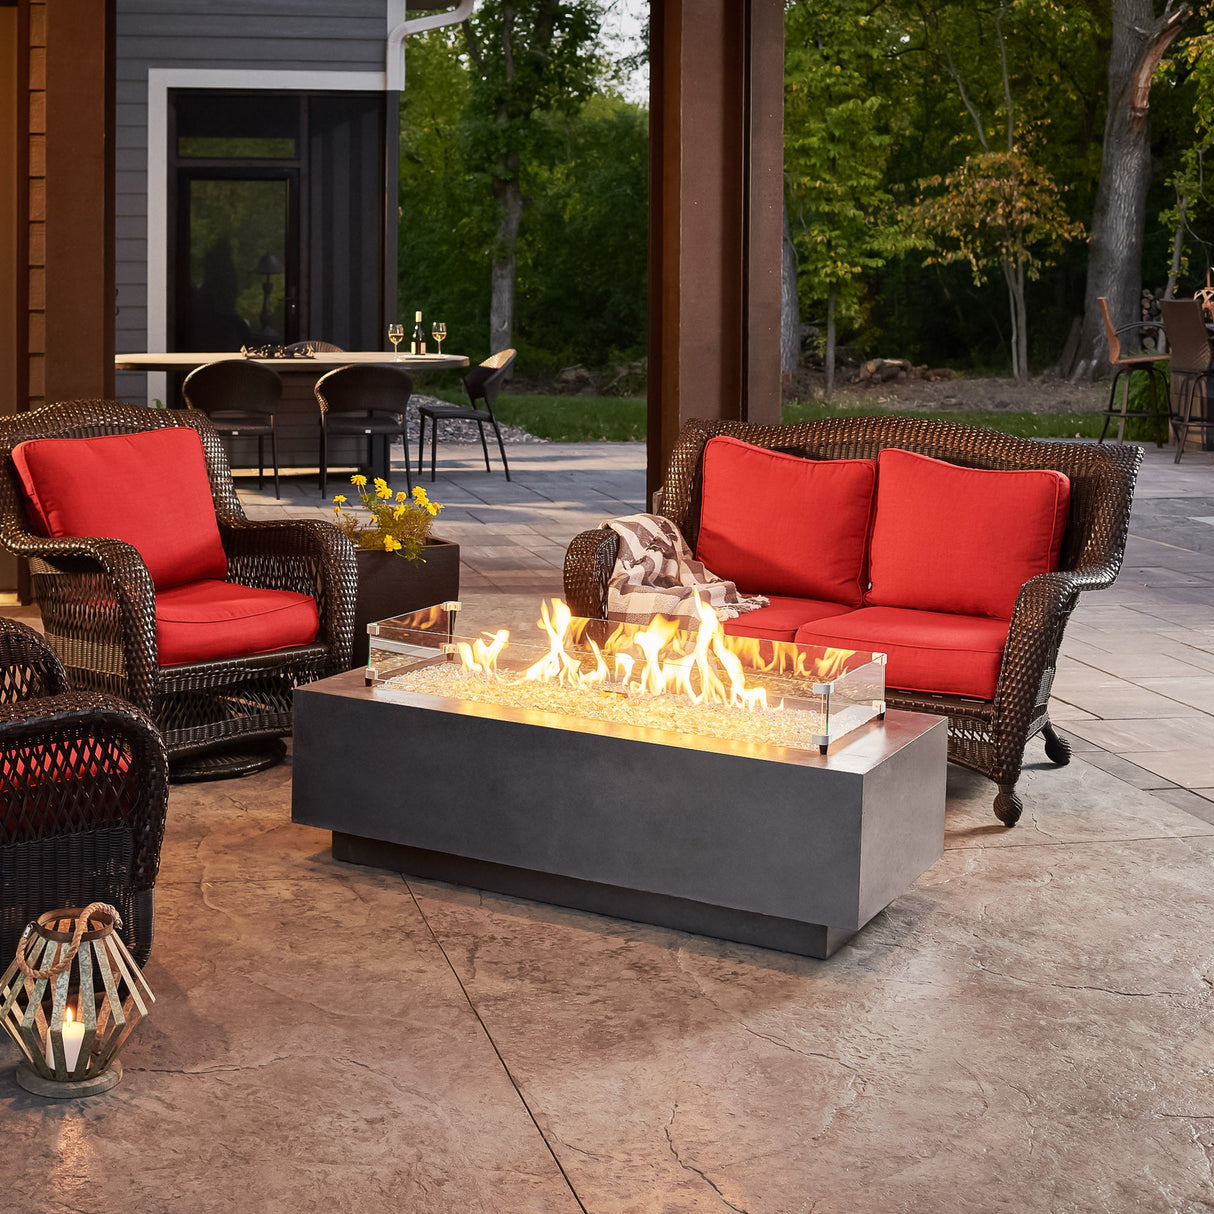 A glass wind guard placed on top of the Midnight Mist Cove Linear Gas Fire Pit Table 54"